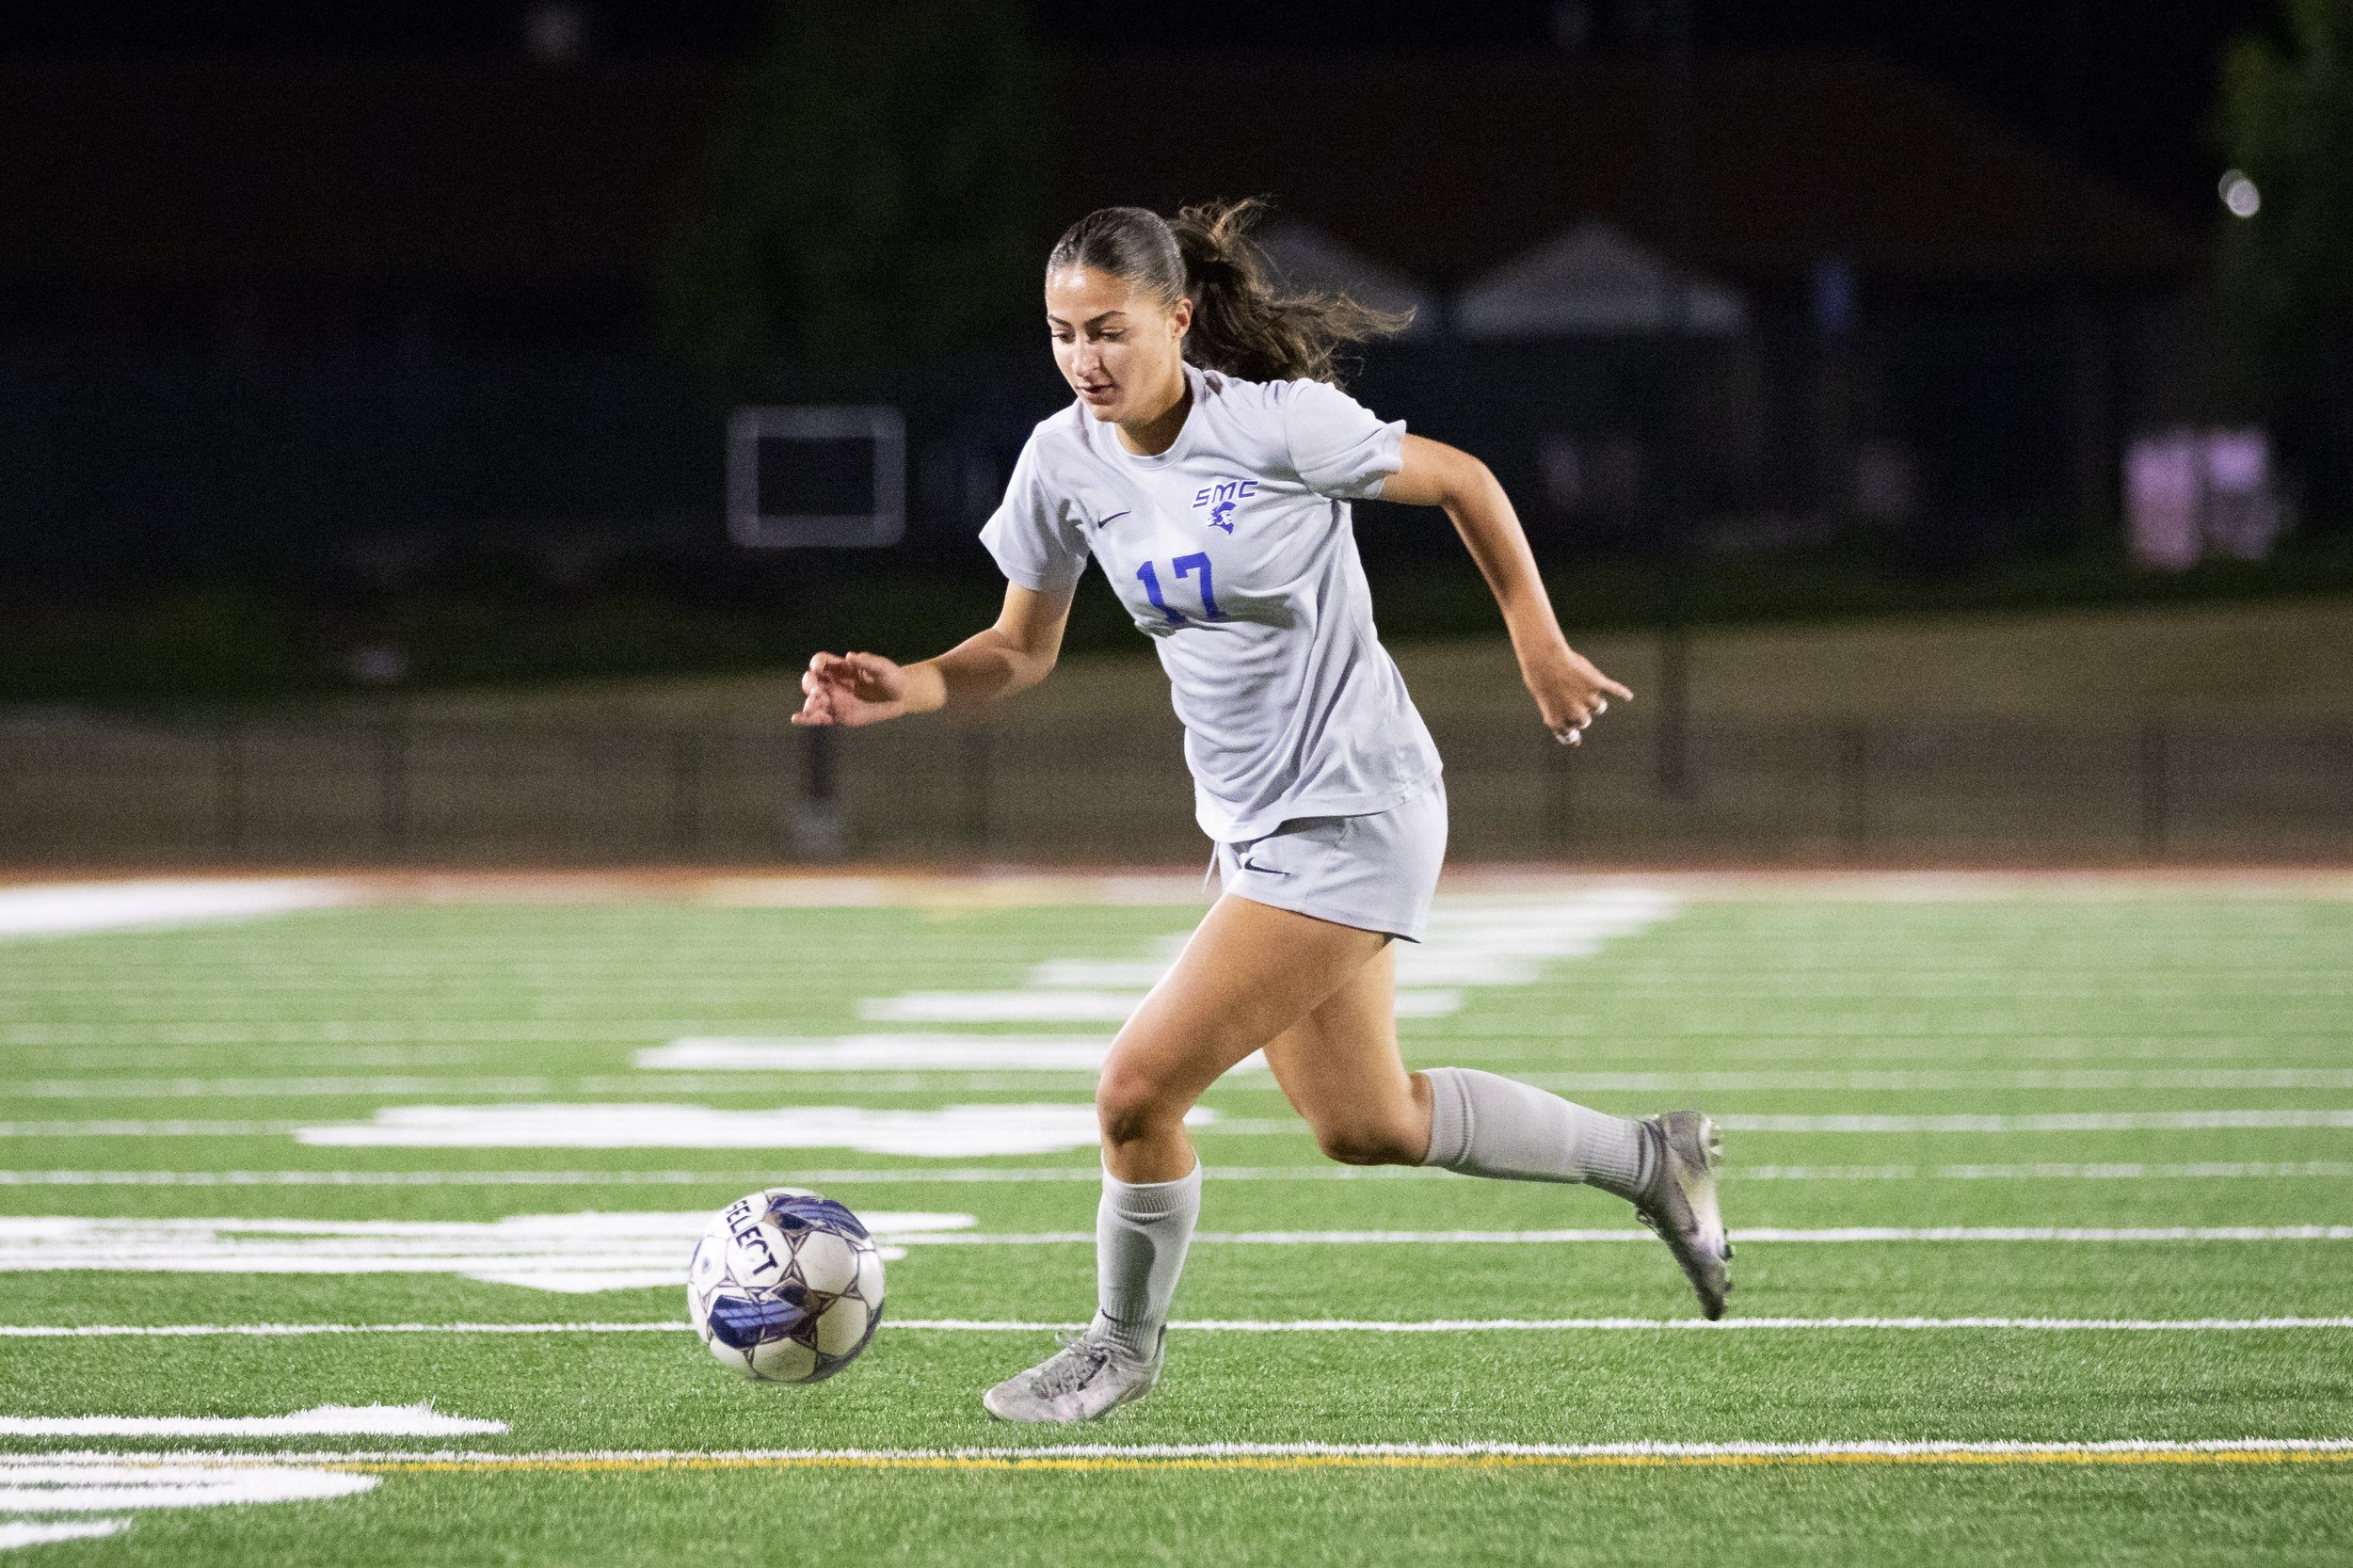  Santa Monica College Corsair forward Jacky Hernandez running the ball towards the goal during the first half of a soccer game against the Saddleback College Bobcats at Saddleback College in Mission Viejo, Calif., on Tuesday, Nov. 21, 2023. The Corsa